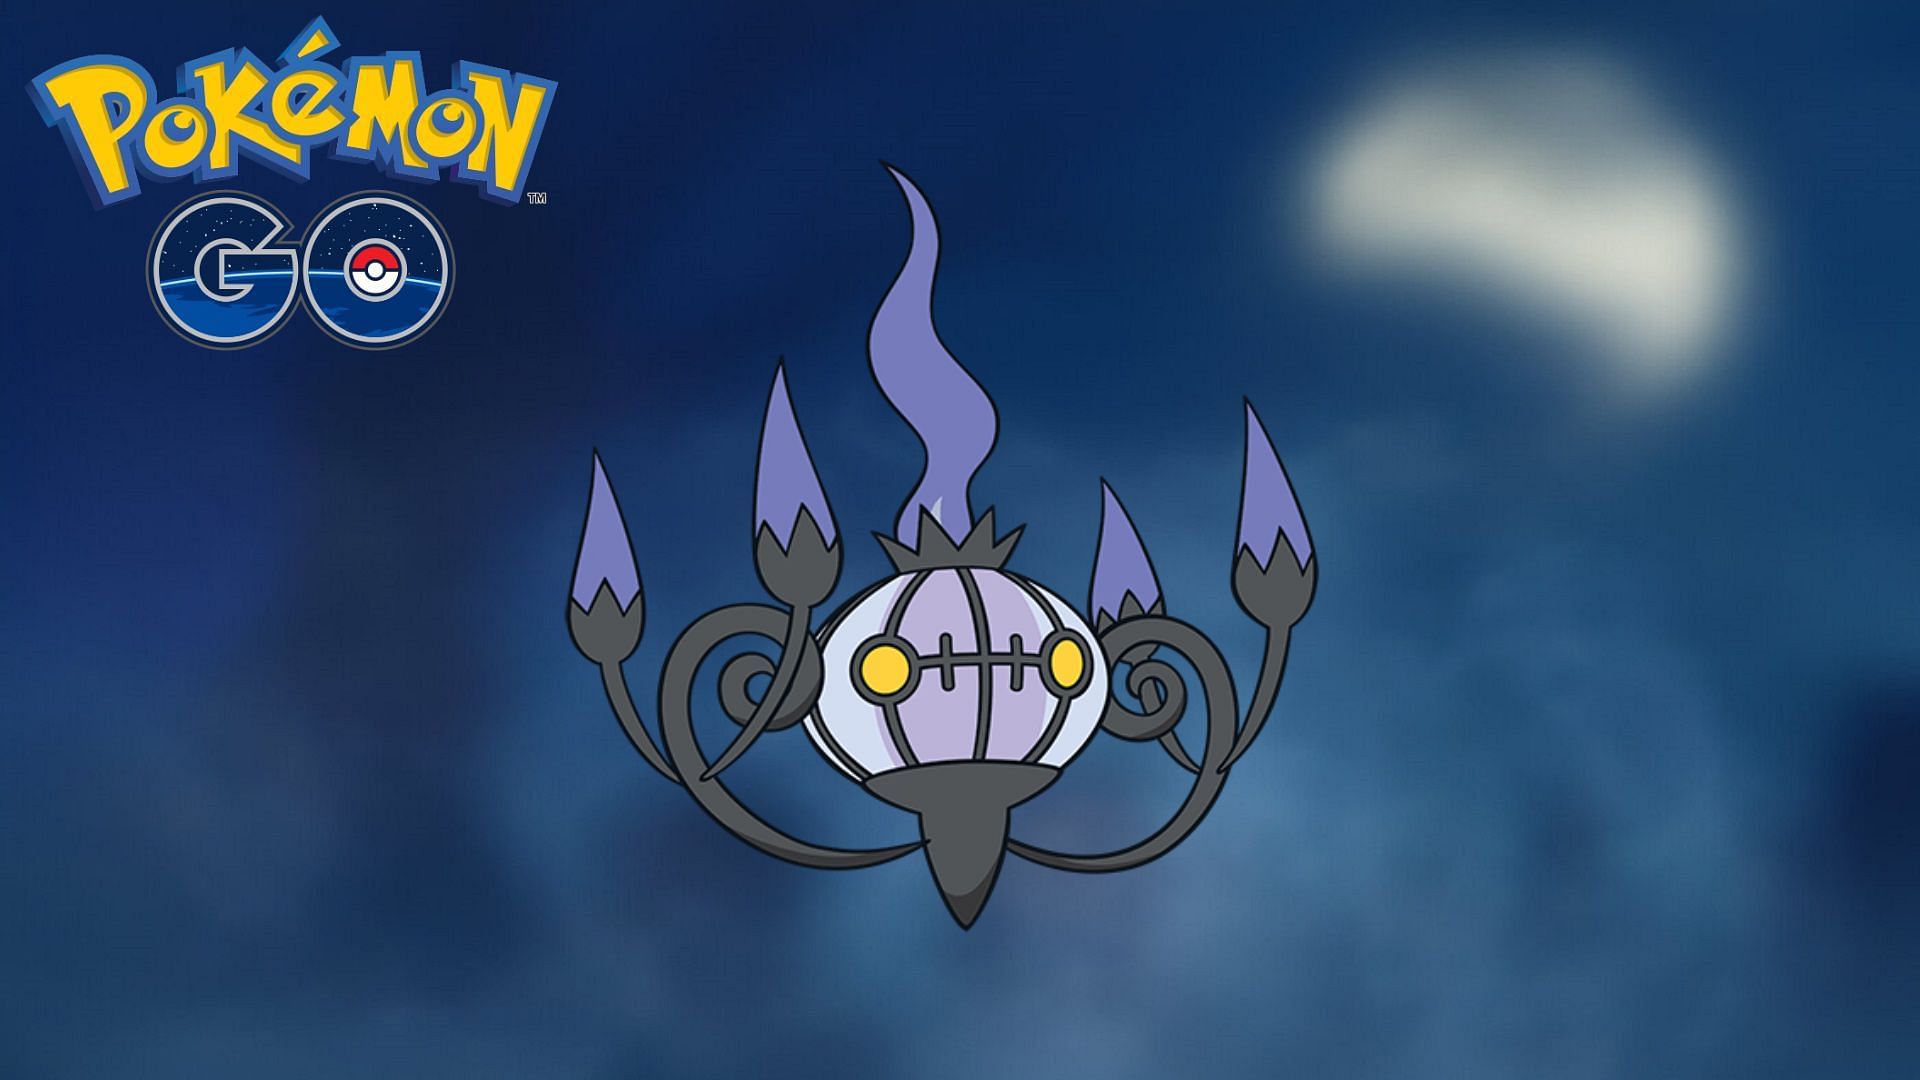 Chandelure is the final evolution of Litwick and Lampent in Pokemon GO.